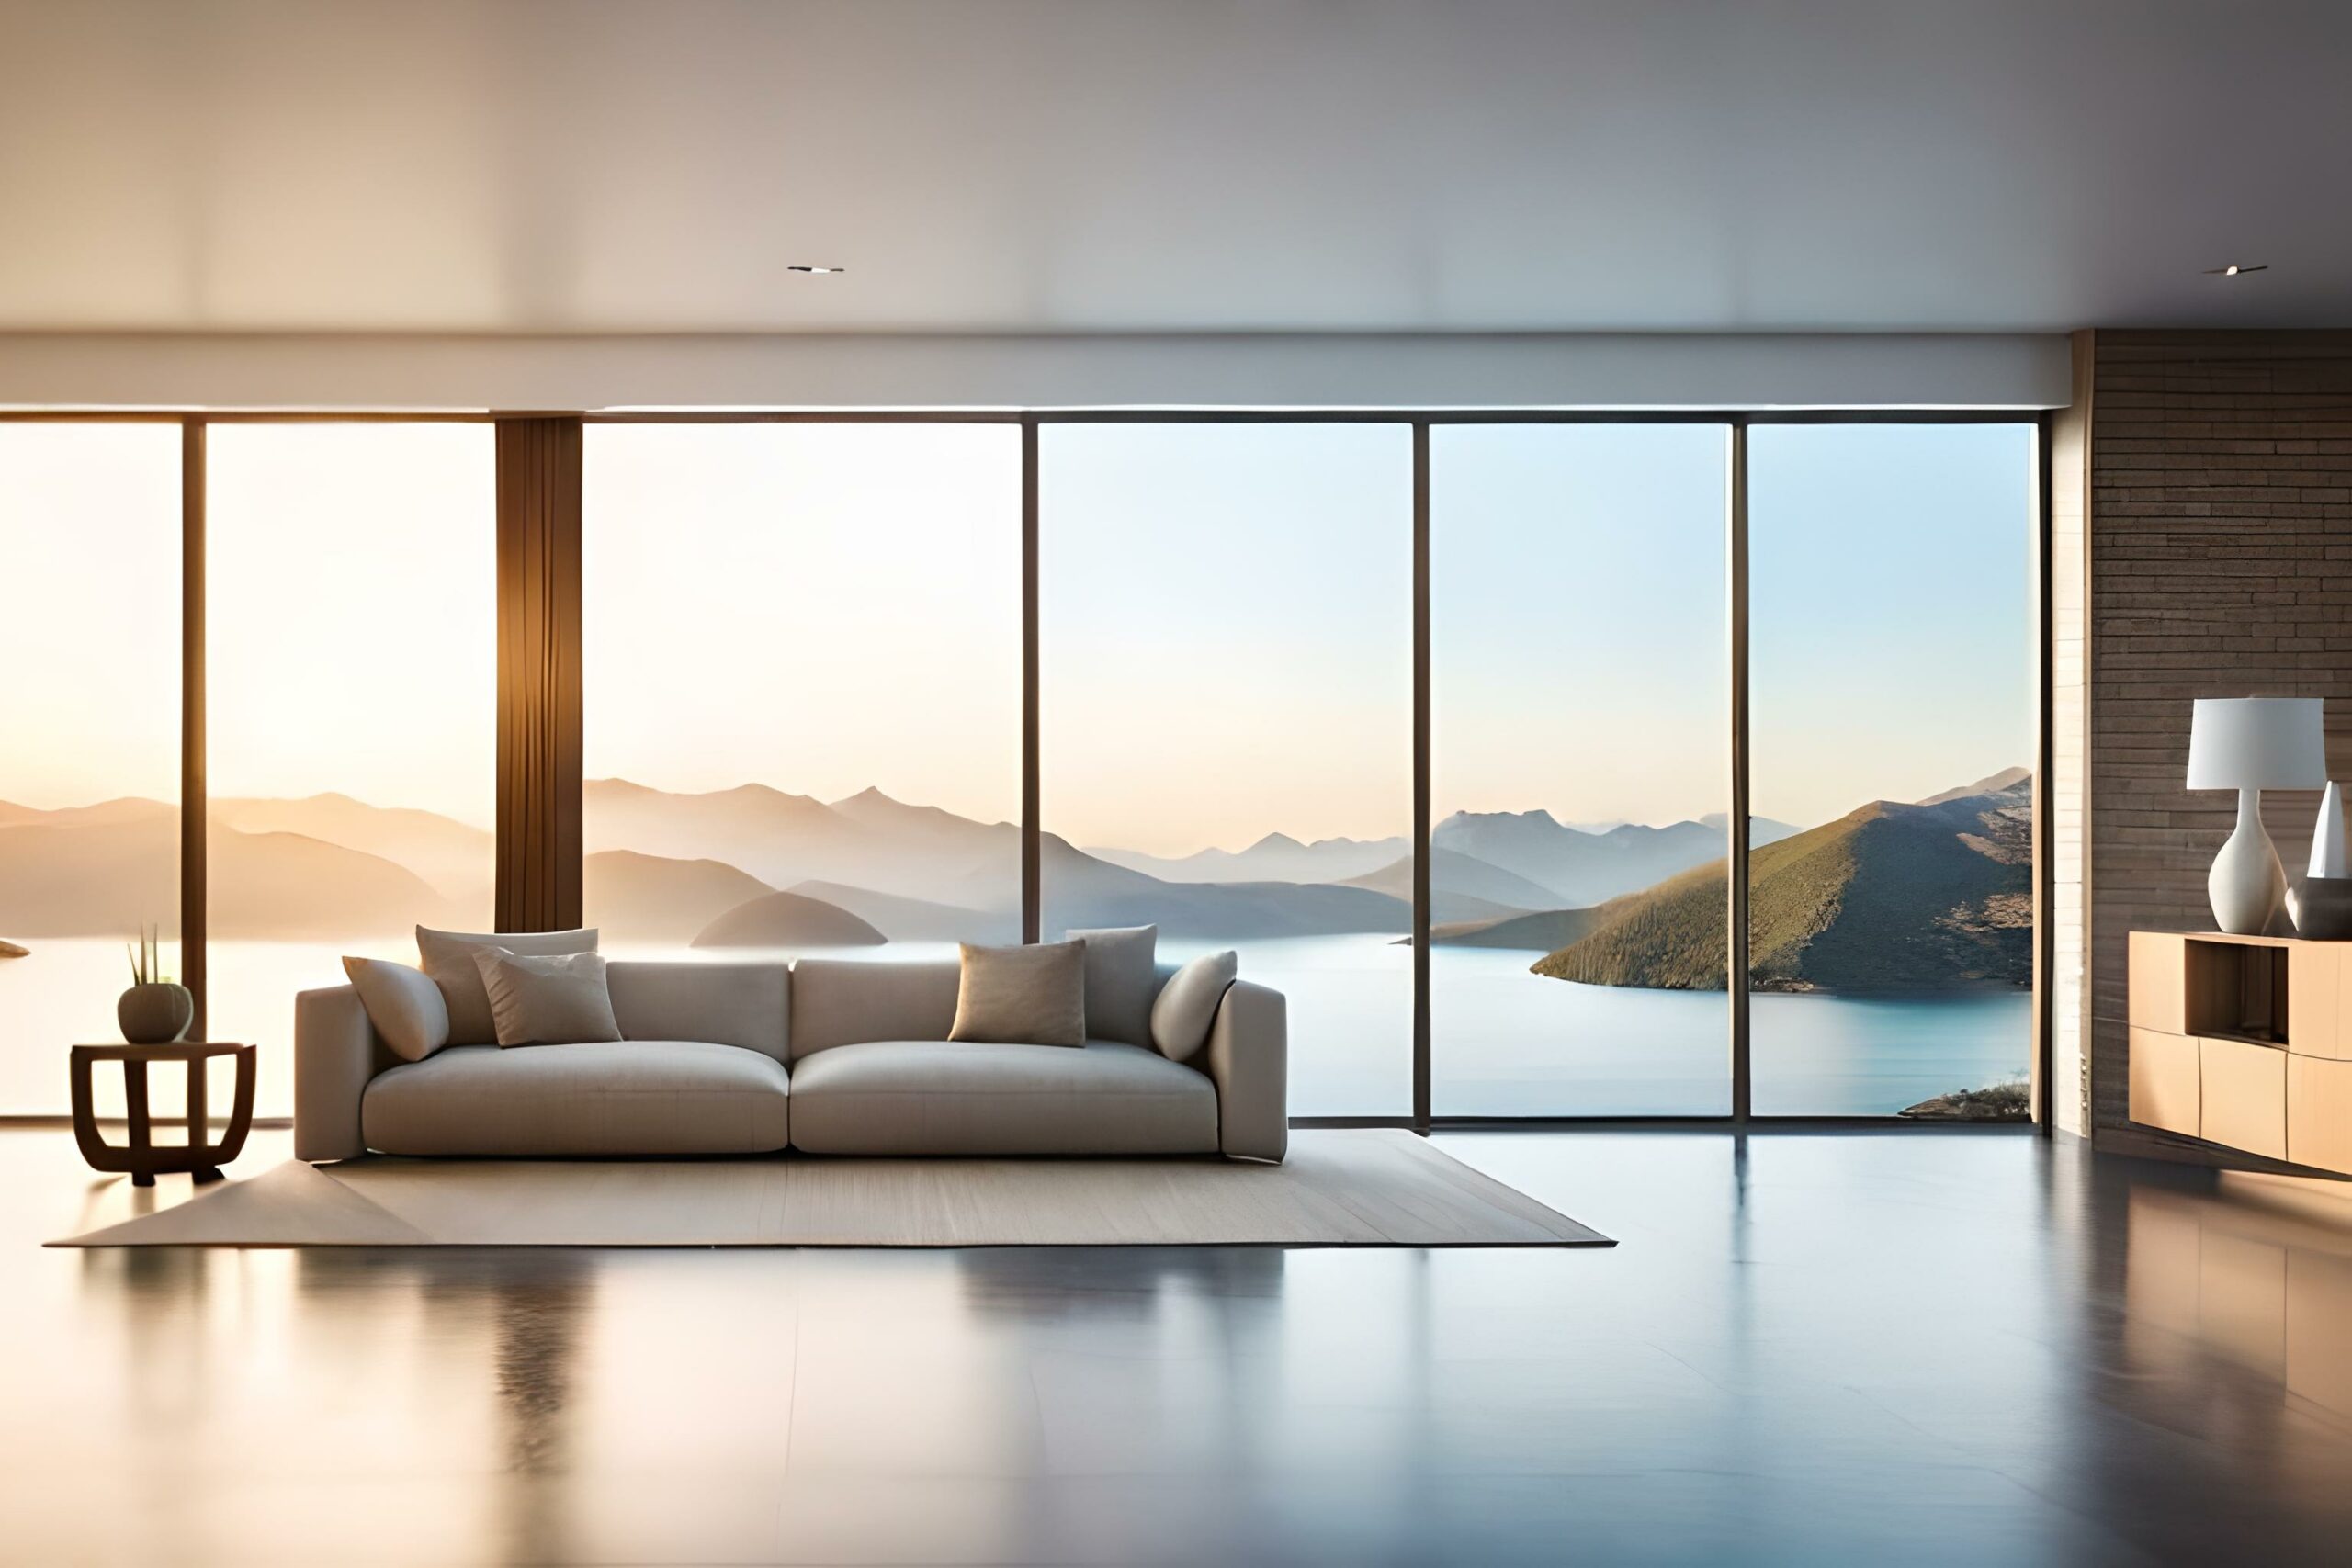 A modern and minimalist living room interior, with a focus on a sleek and elegant sofa, placed against a large window overlooking a serene lake and mountains in the distance, the soft rays of the sett